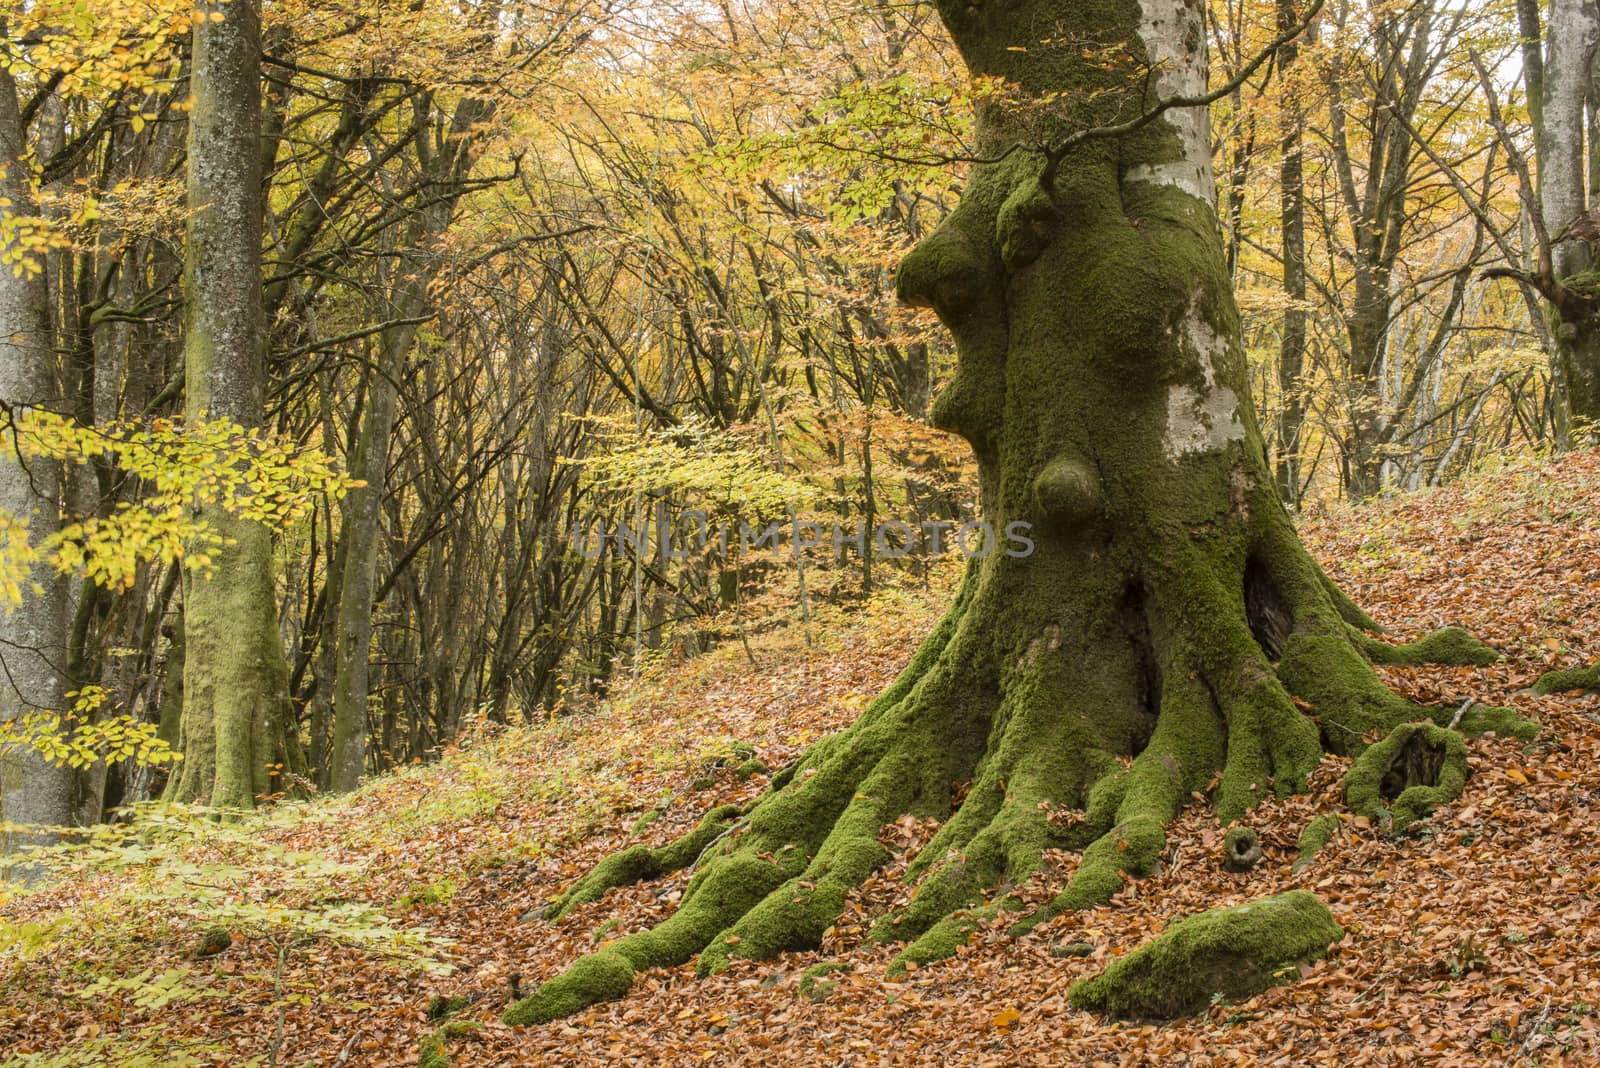 Ancient beech tree forest in Italy, Mount Cimino, UNESCO World Heritage Nature Site